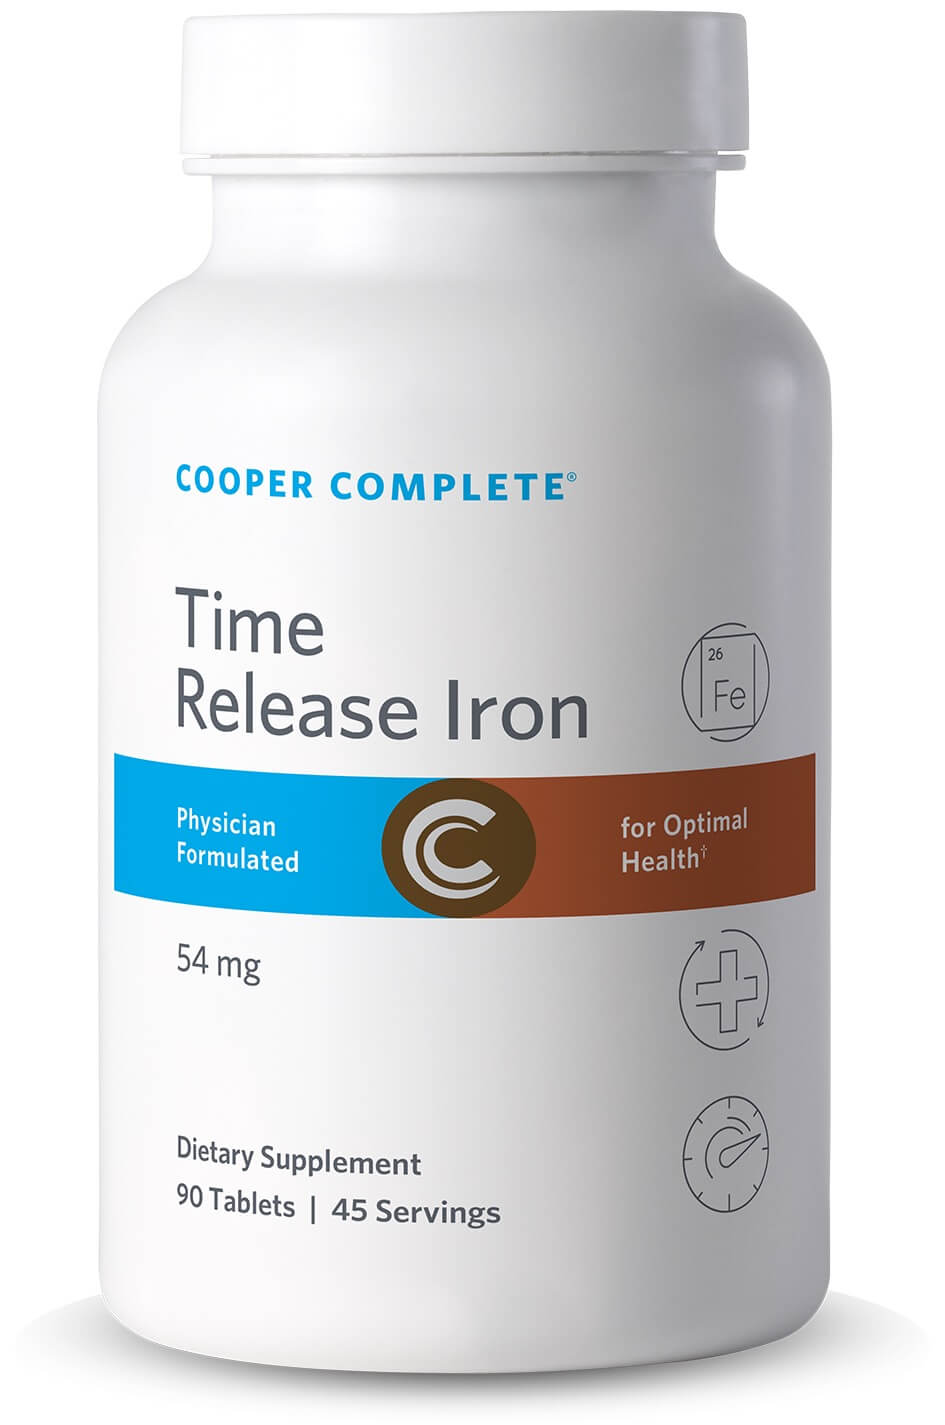 Photo of Cooper Complete Time Release Iron Supplement 54 mg bottle